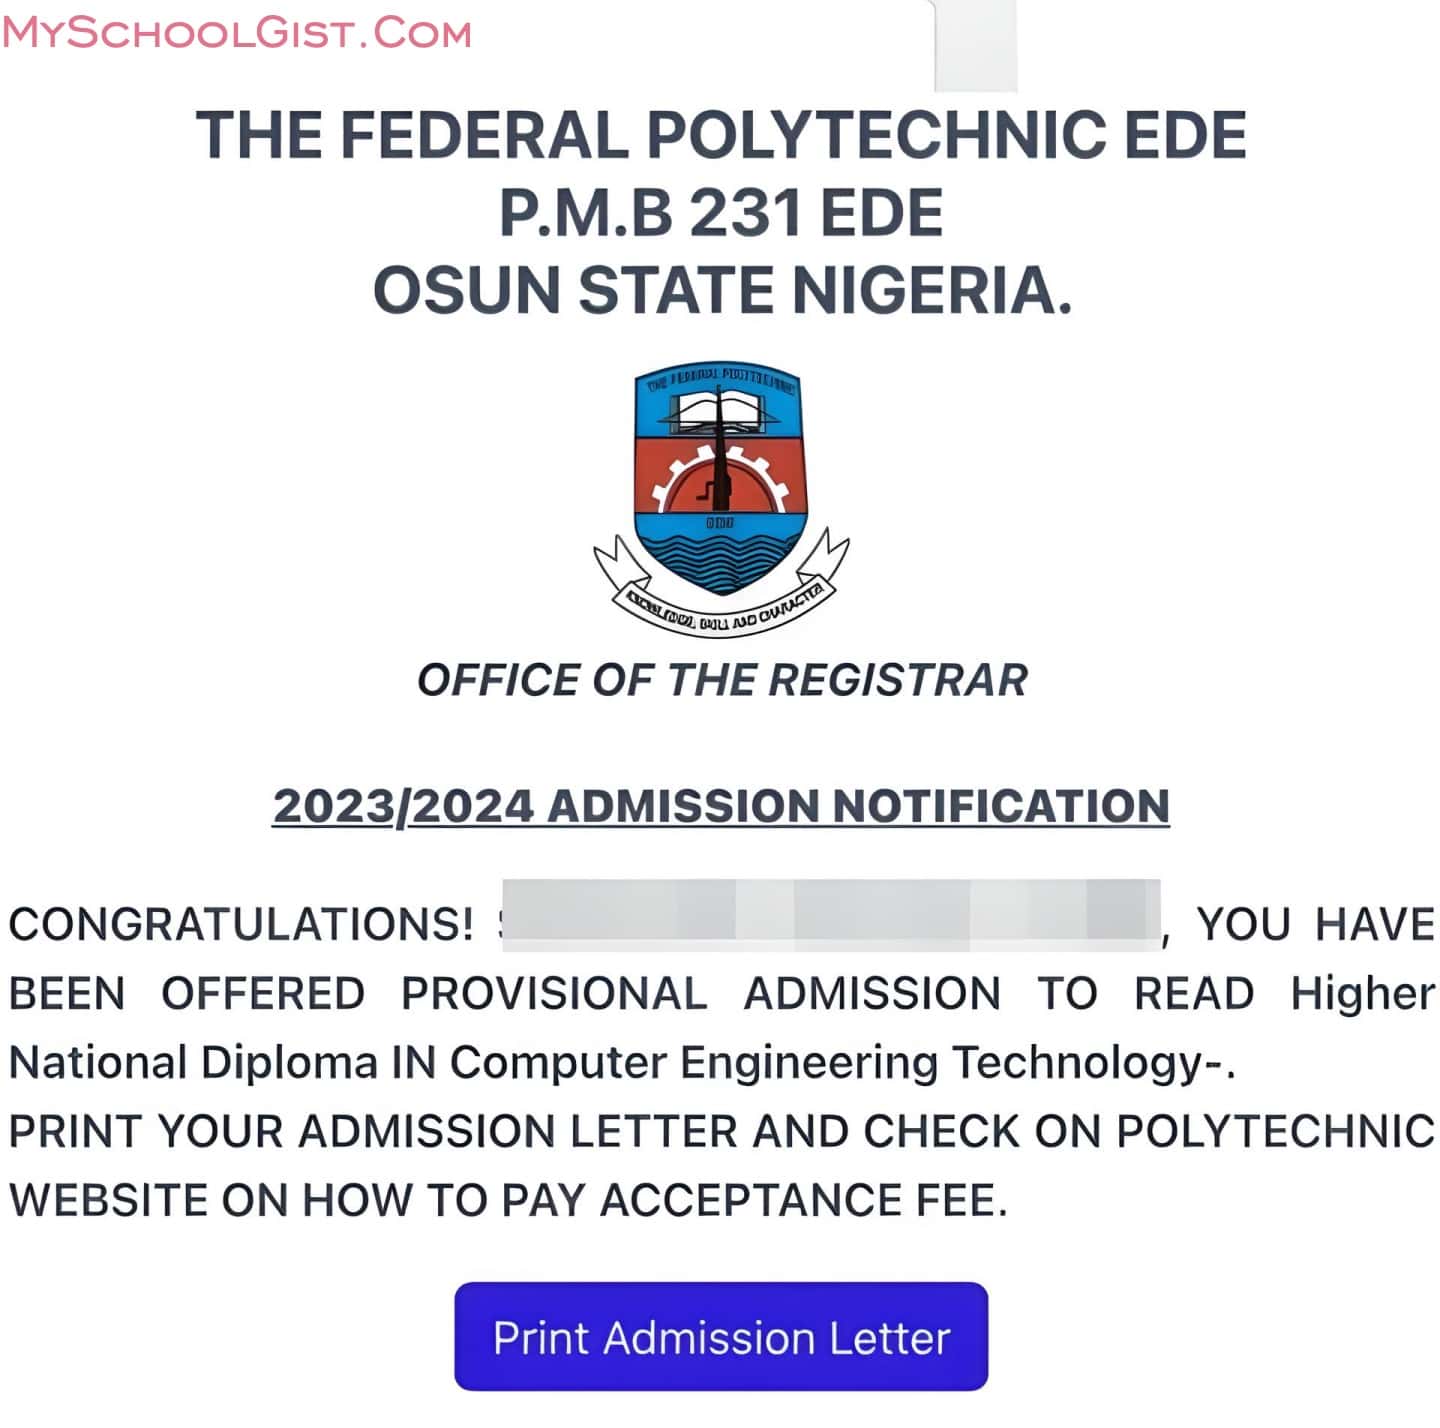 How to Check Federal Polytechnic Ede HND Admission List 2023-2024